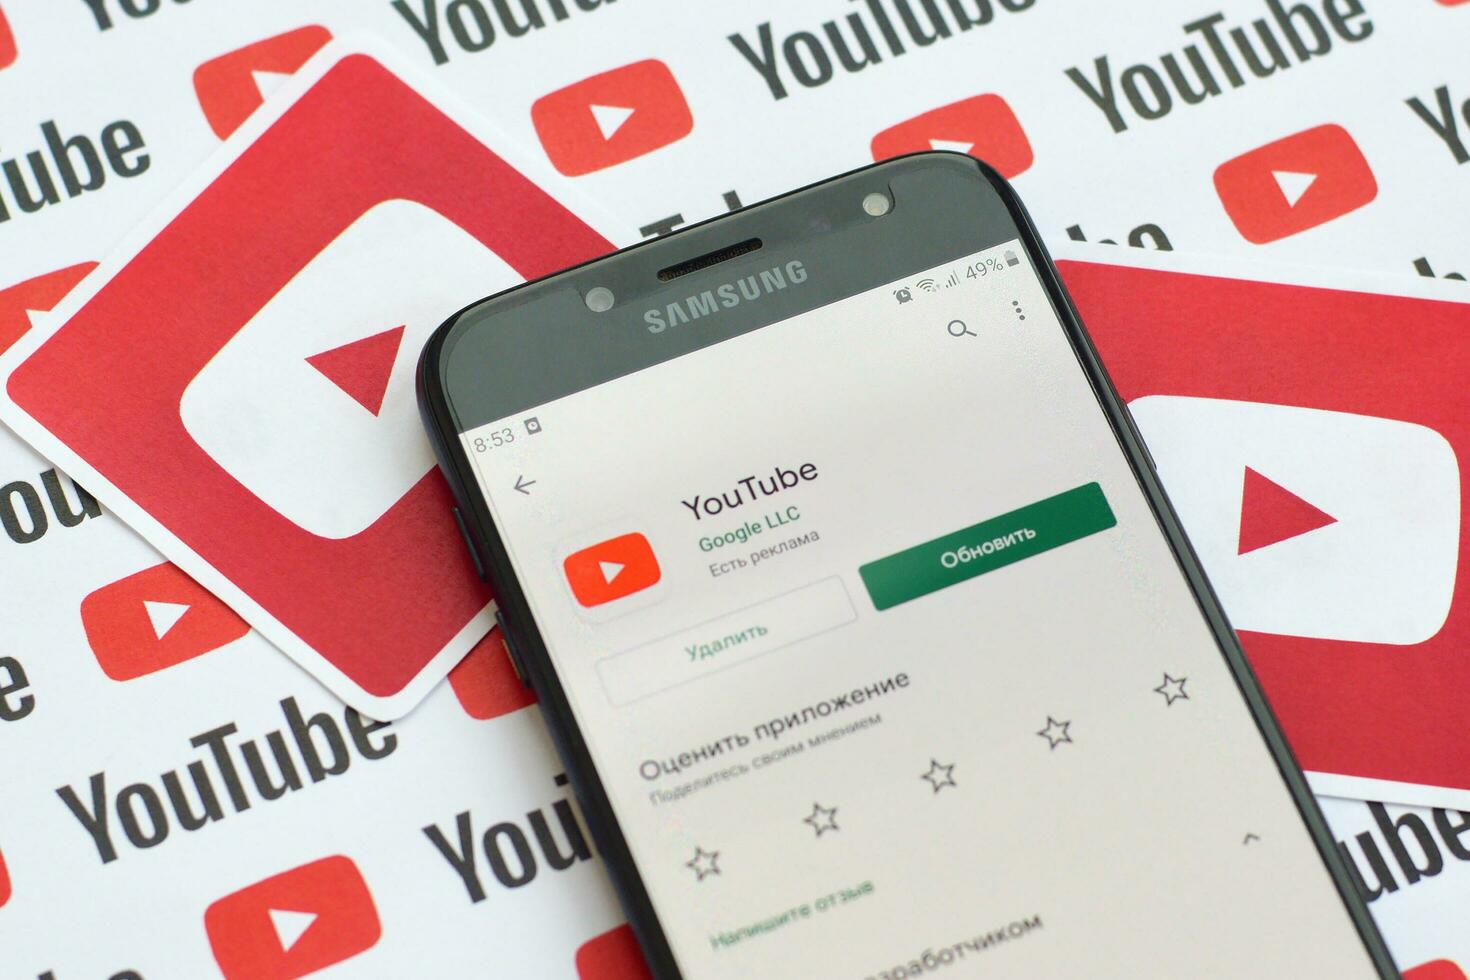 Youtube app on samsung smartphone screen on paper banner with small youtube logos and inscriptions. YouTube is Google subsidiary and American most popular video-sharing platform photo